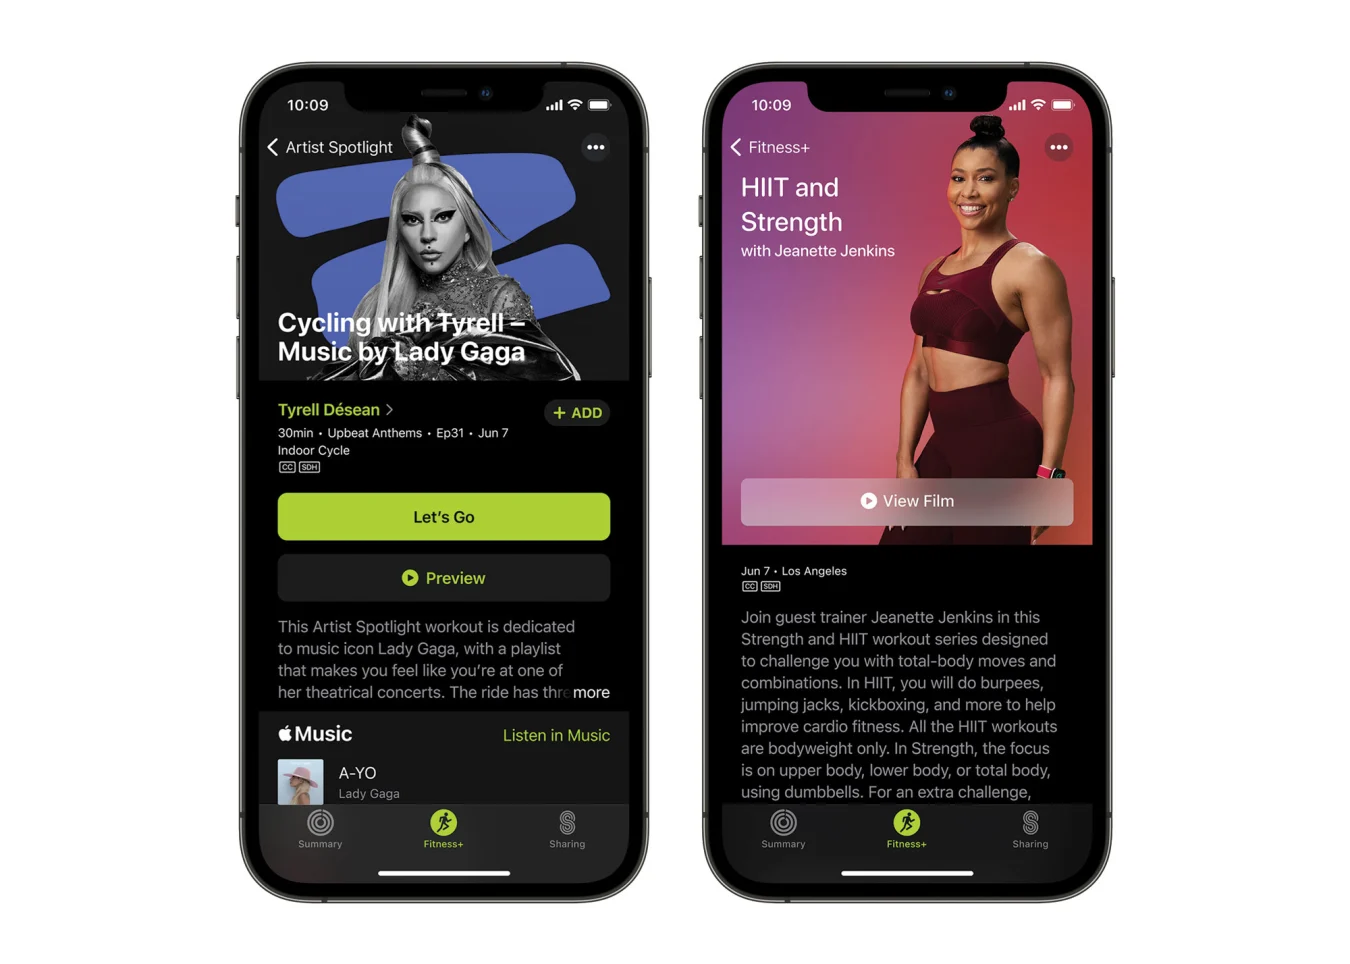 Apple Fitness+. Two phones each featuring screenshots of the new updates. On the left is the Artist Spotlight featuring 